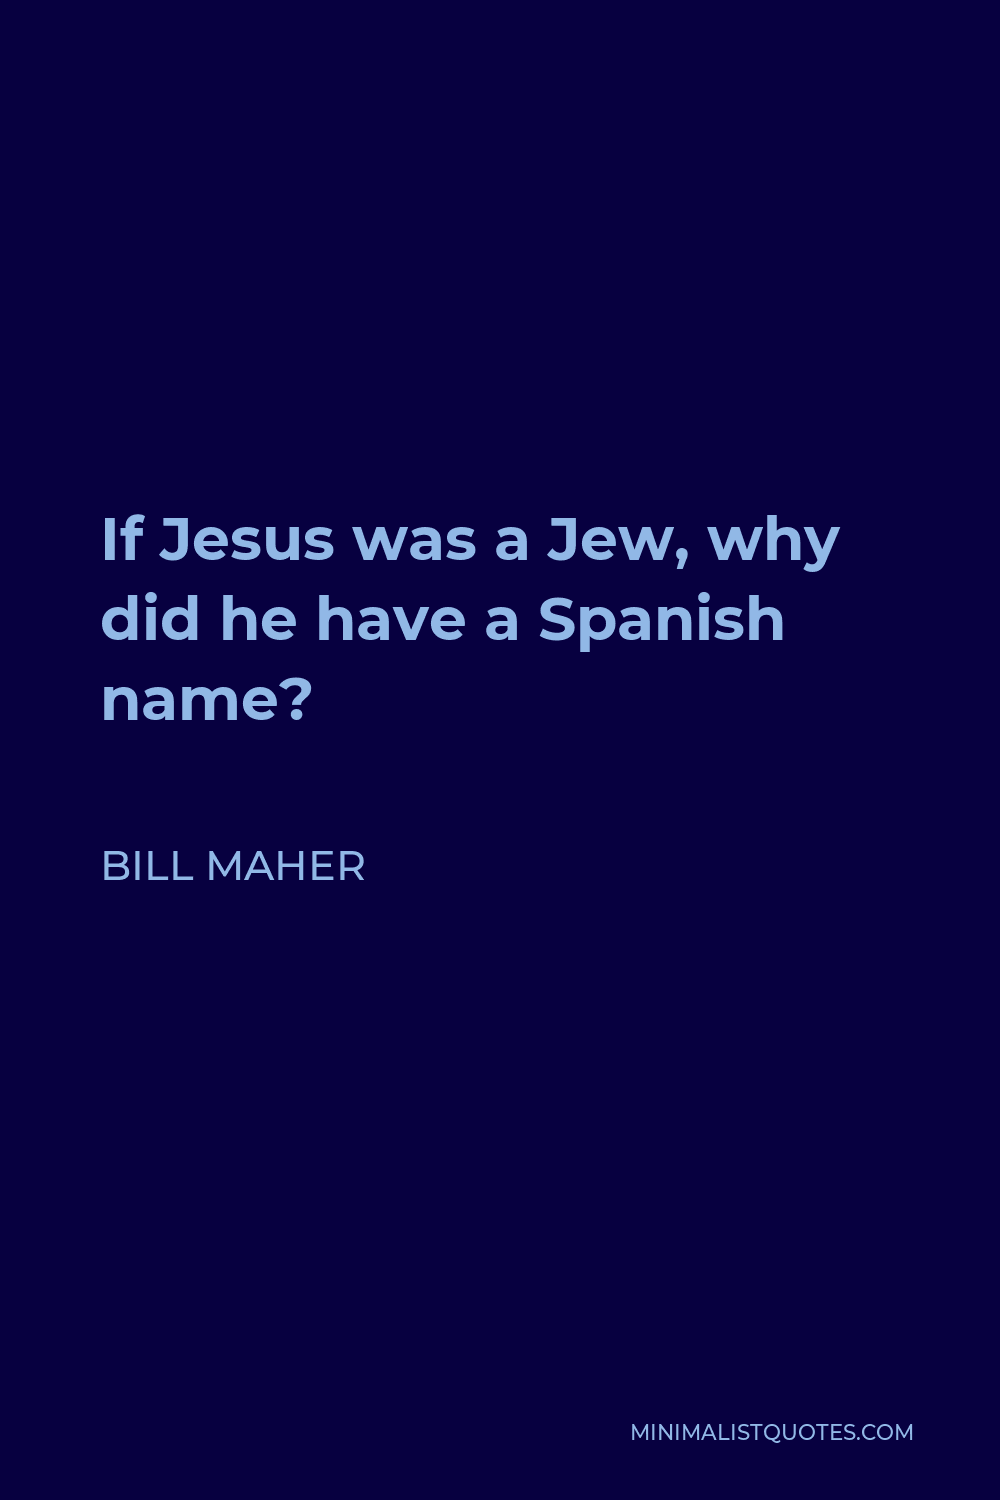 Bill Maher Quote - If Jesus was a Jew, why did he have a Spanish name?